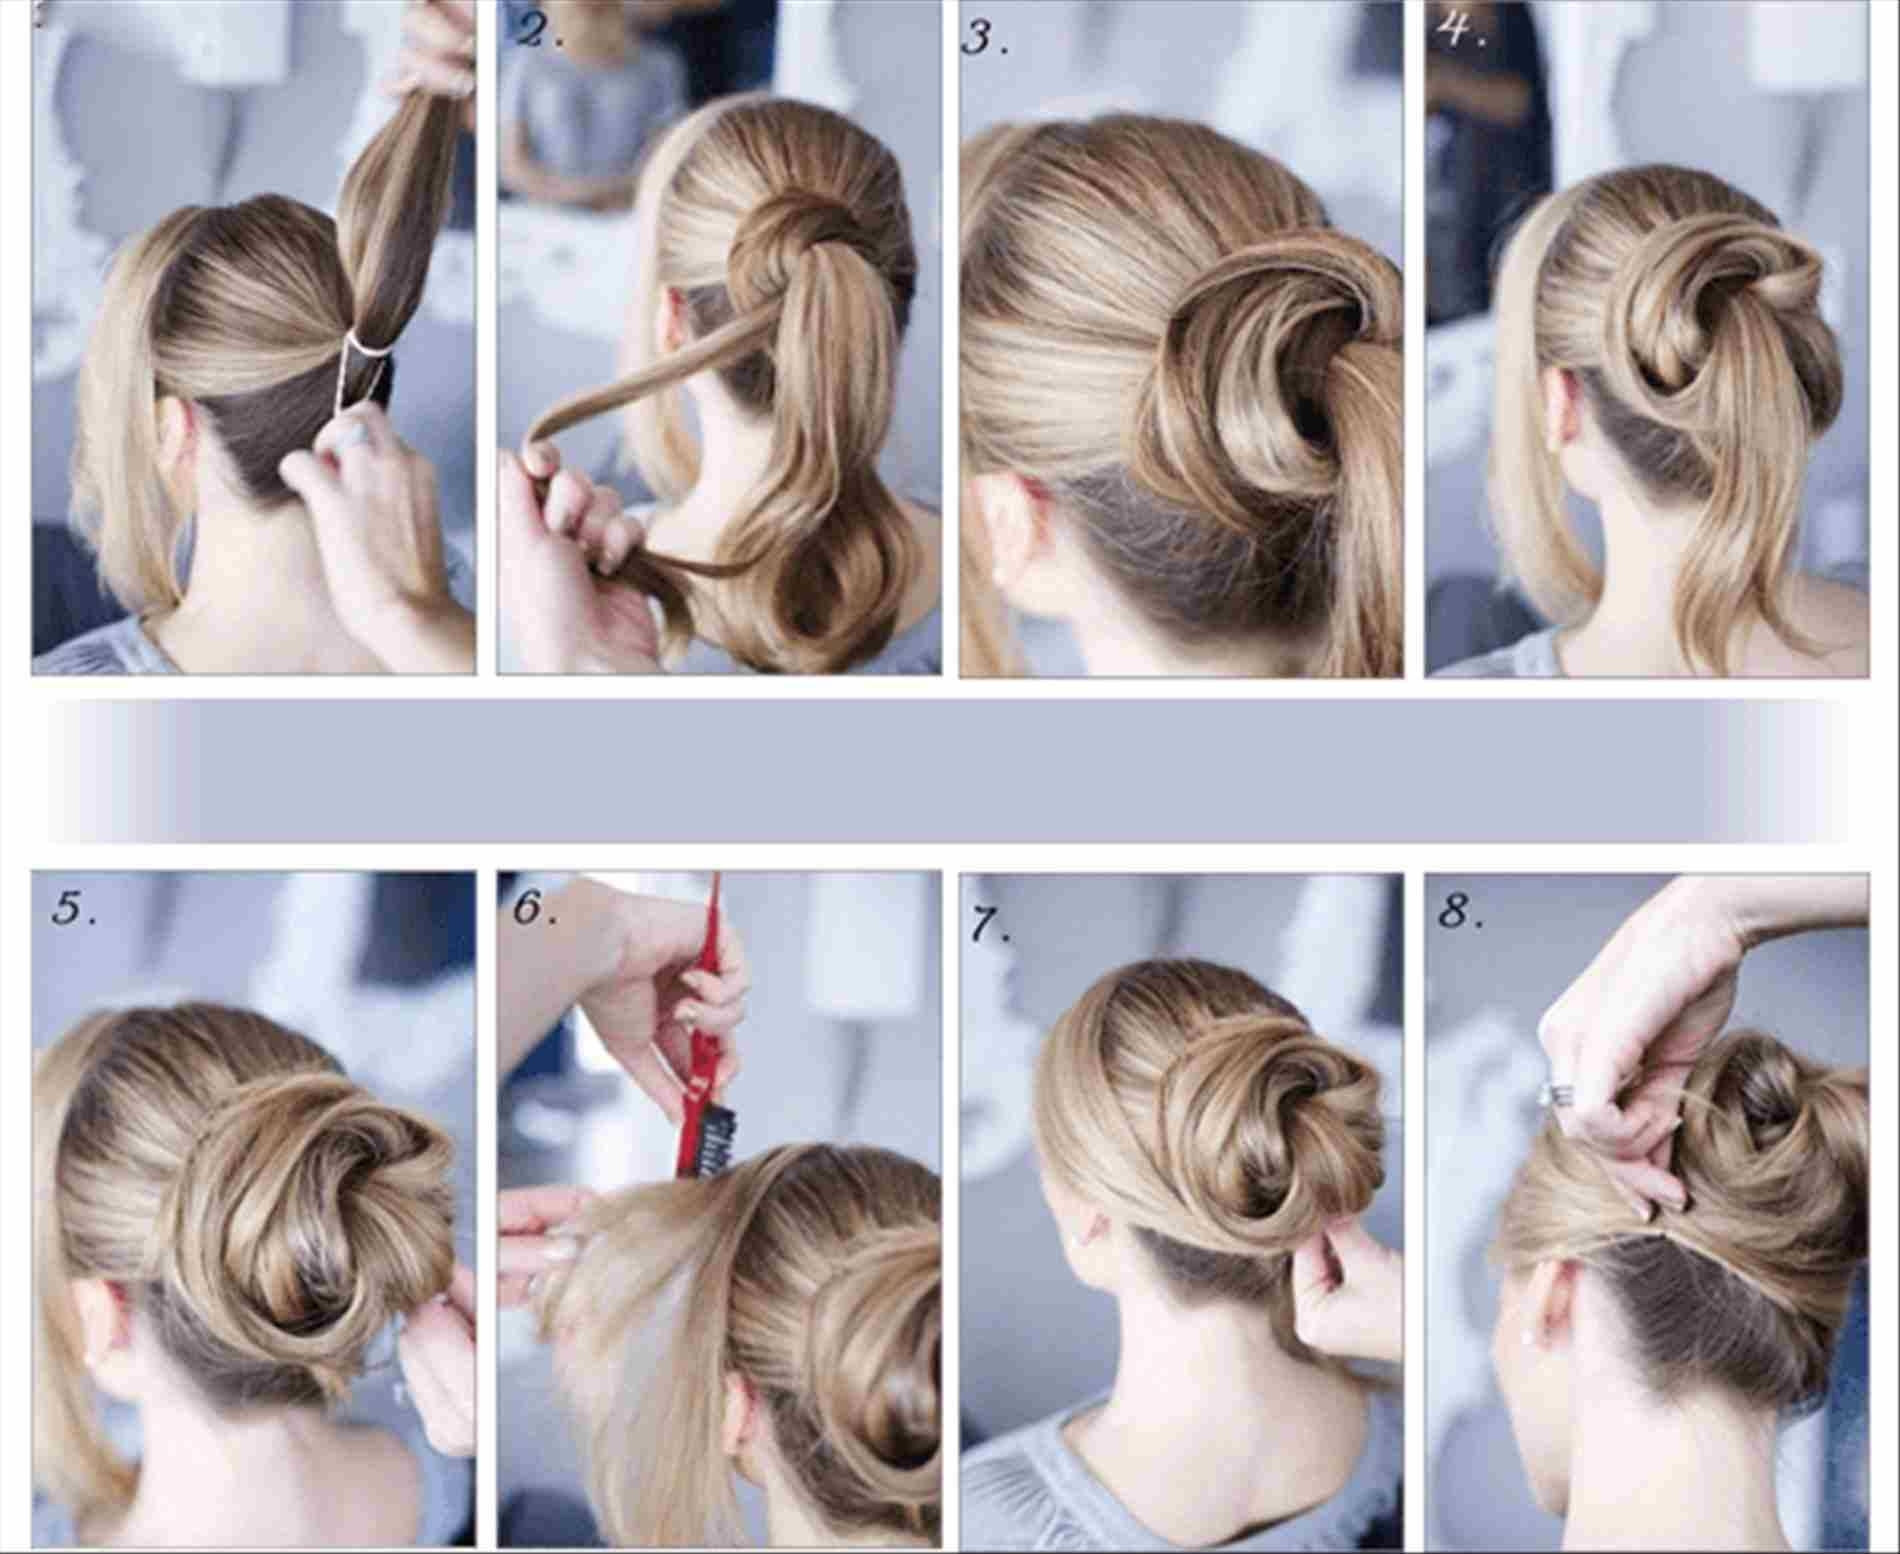 Easy Messy Hairstyles
 How To Make Messy Bun Hairstyle At Home HairStyles